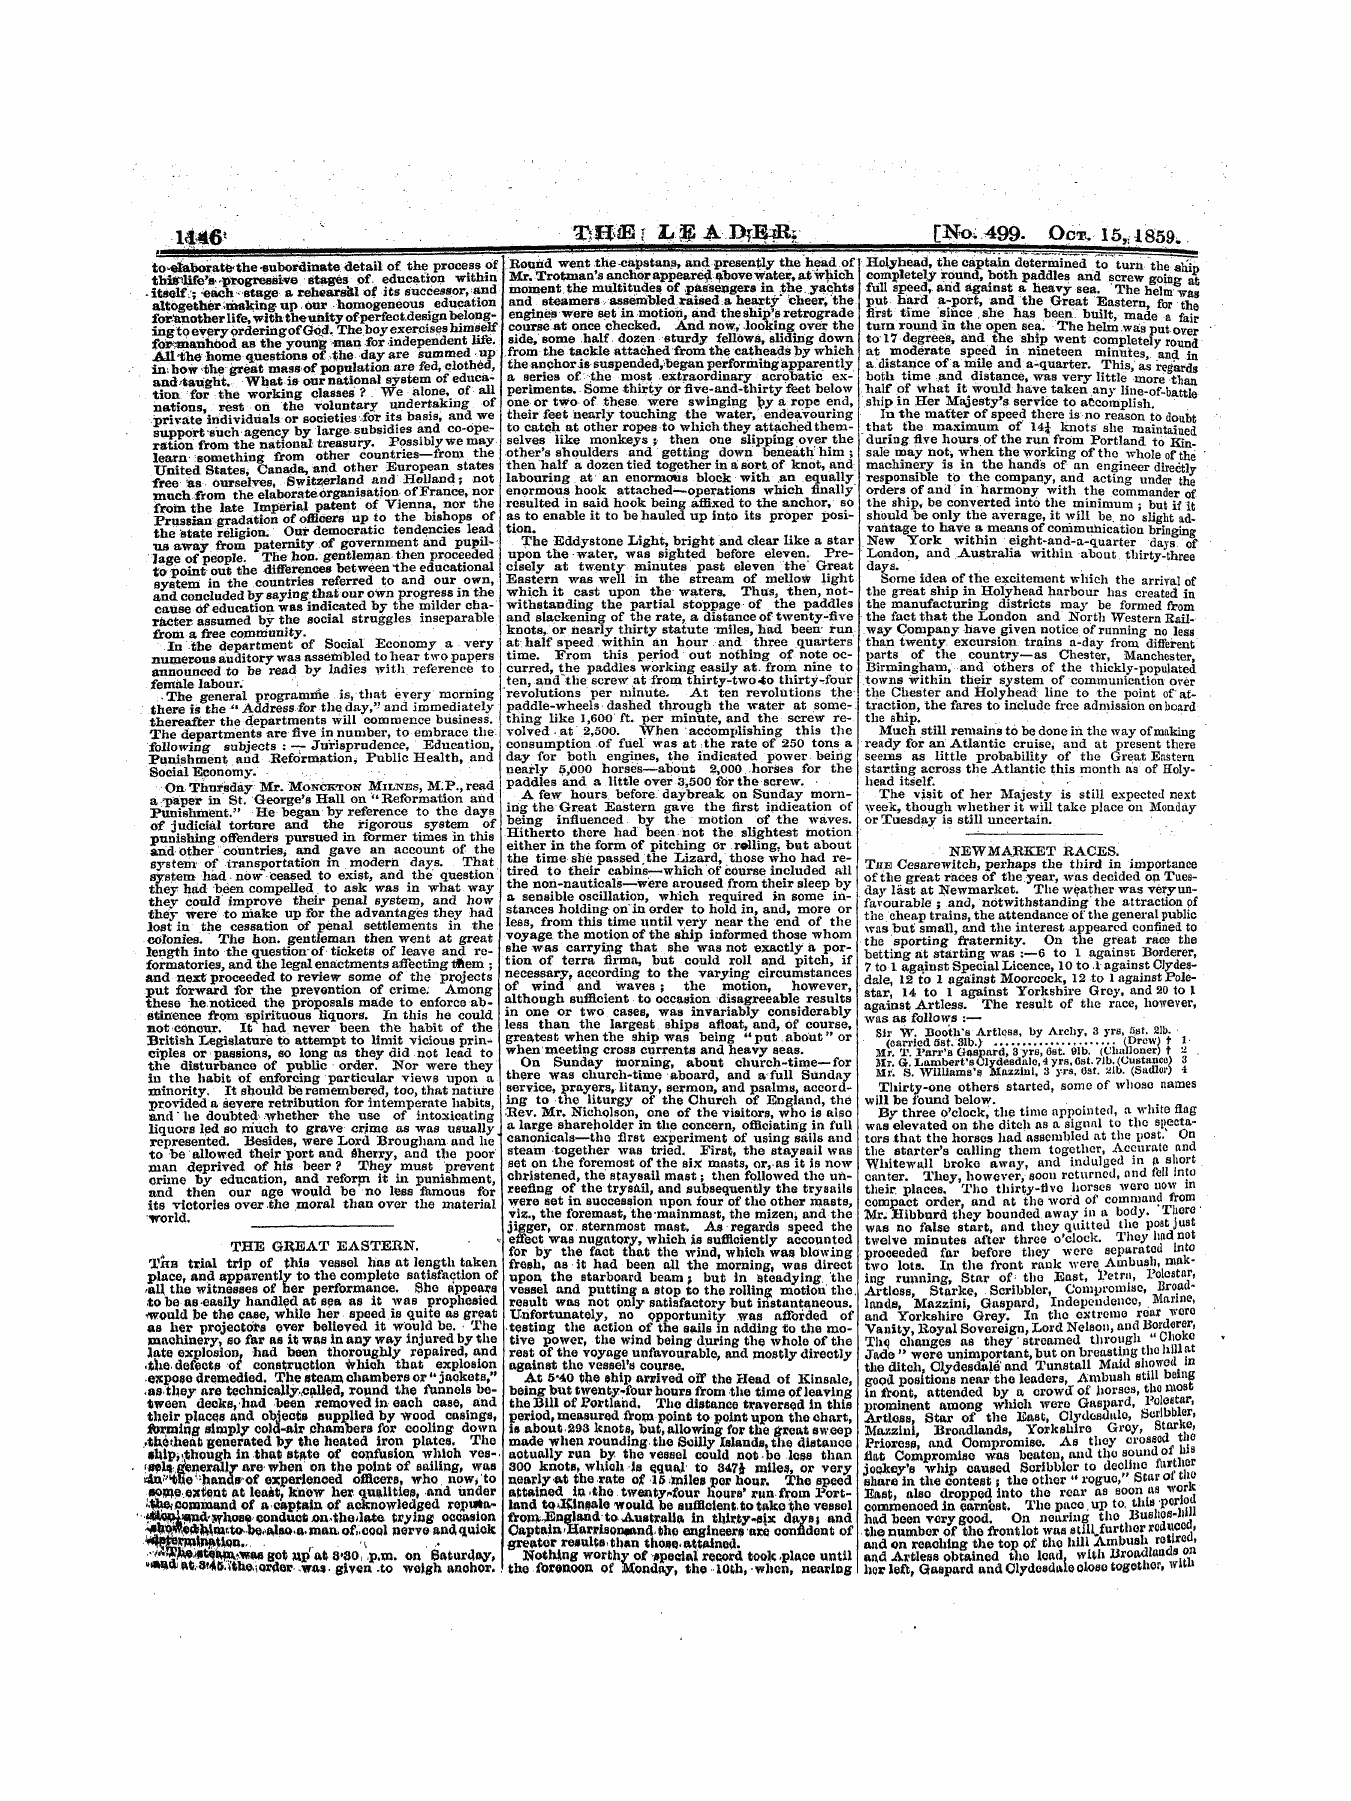 Leader (1850-1860): jS F Y, 1st edition - Untitled Article